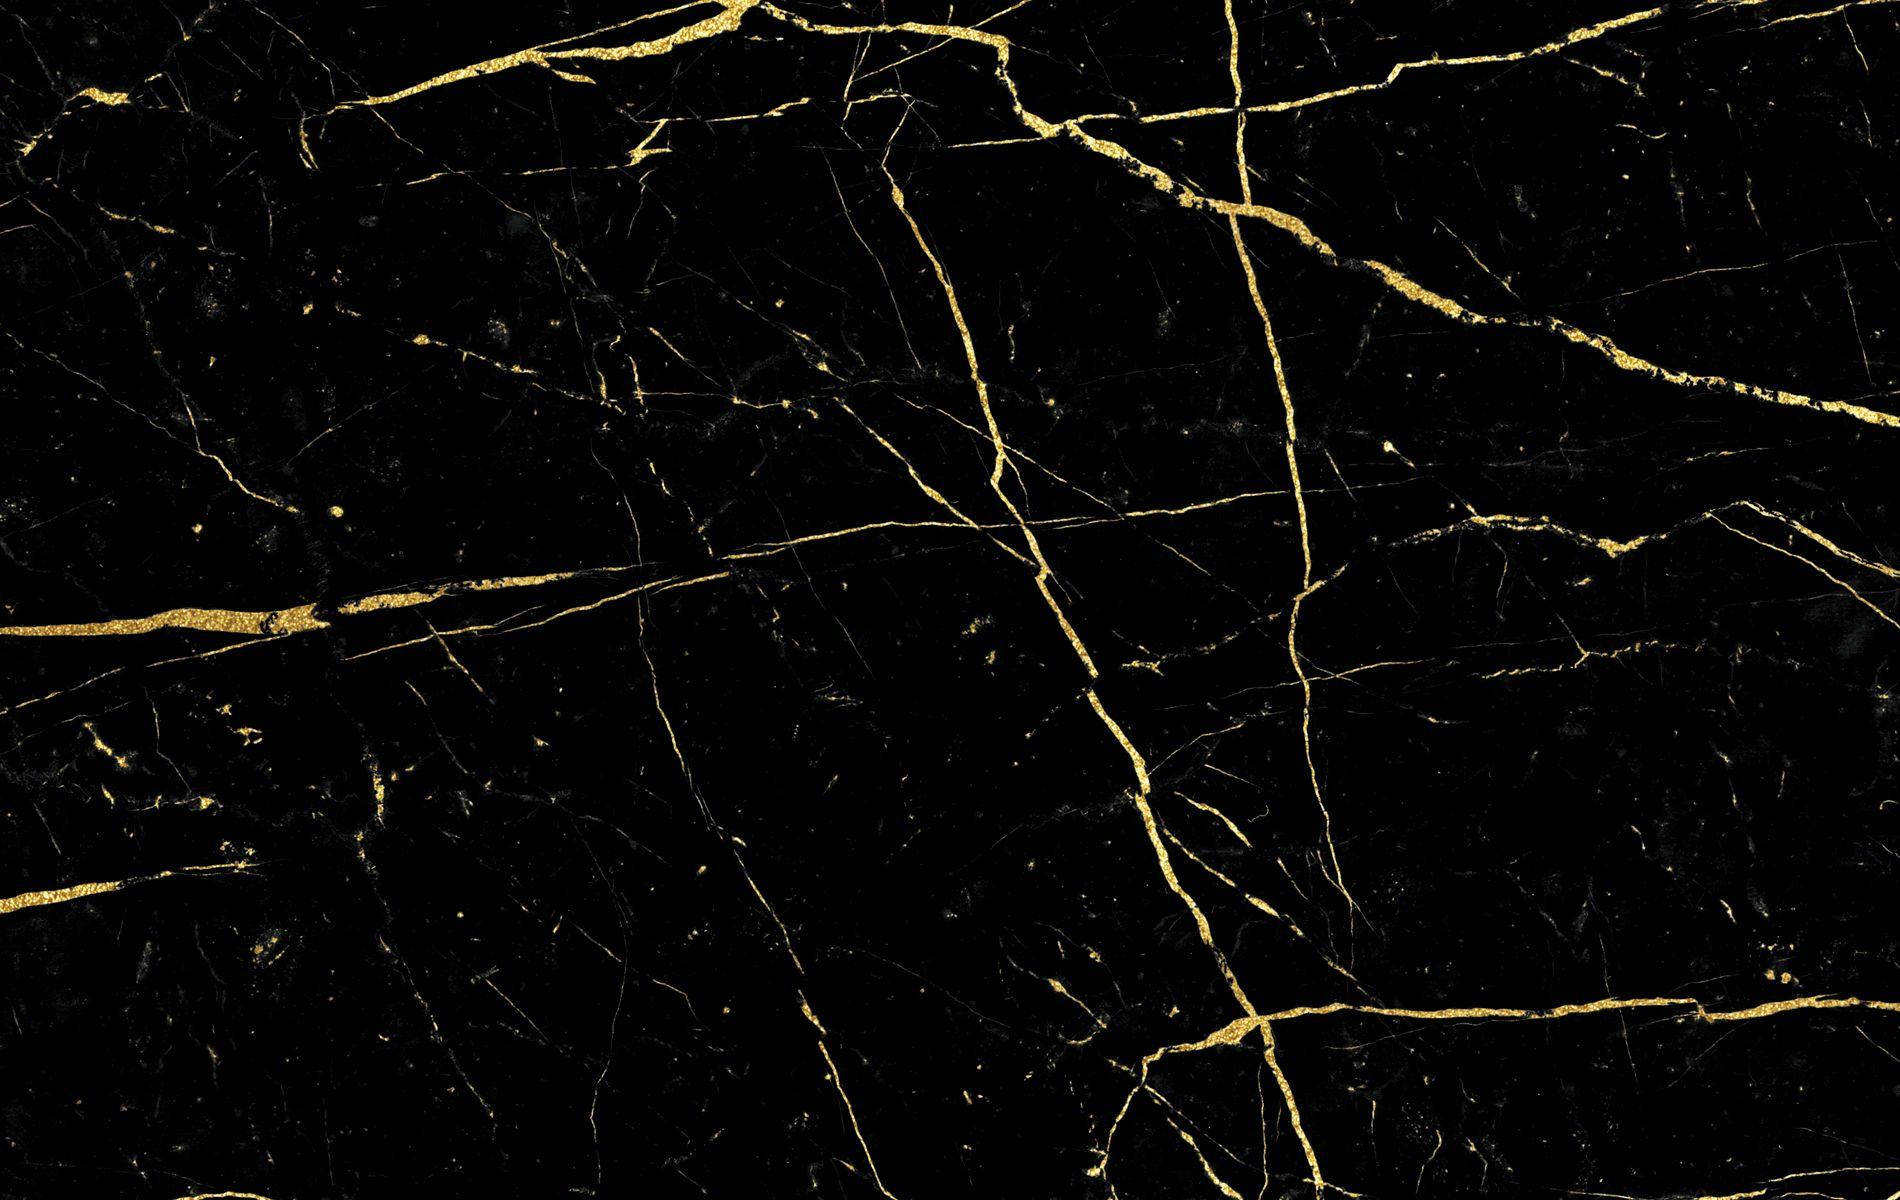 Caption: Exquisite Black Marble iPhone Background with Gold Veins Wallpaper